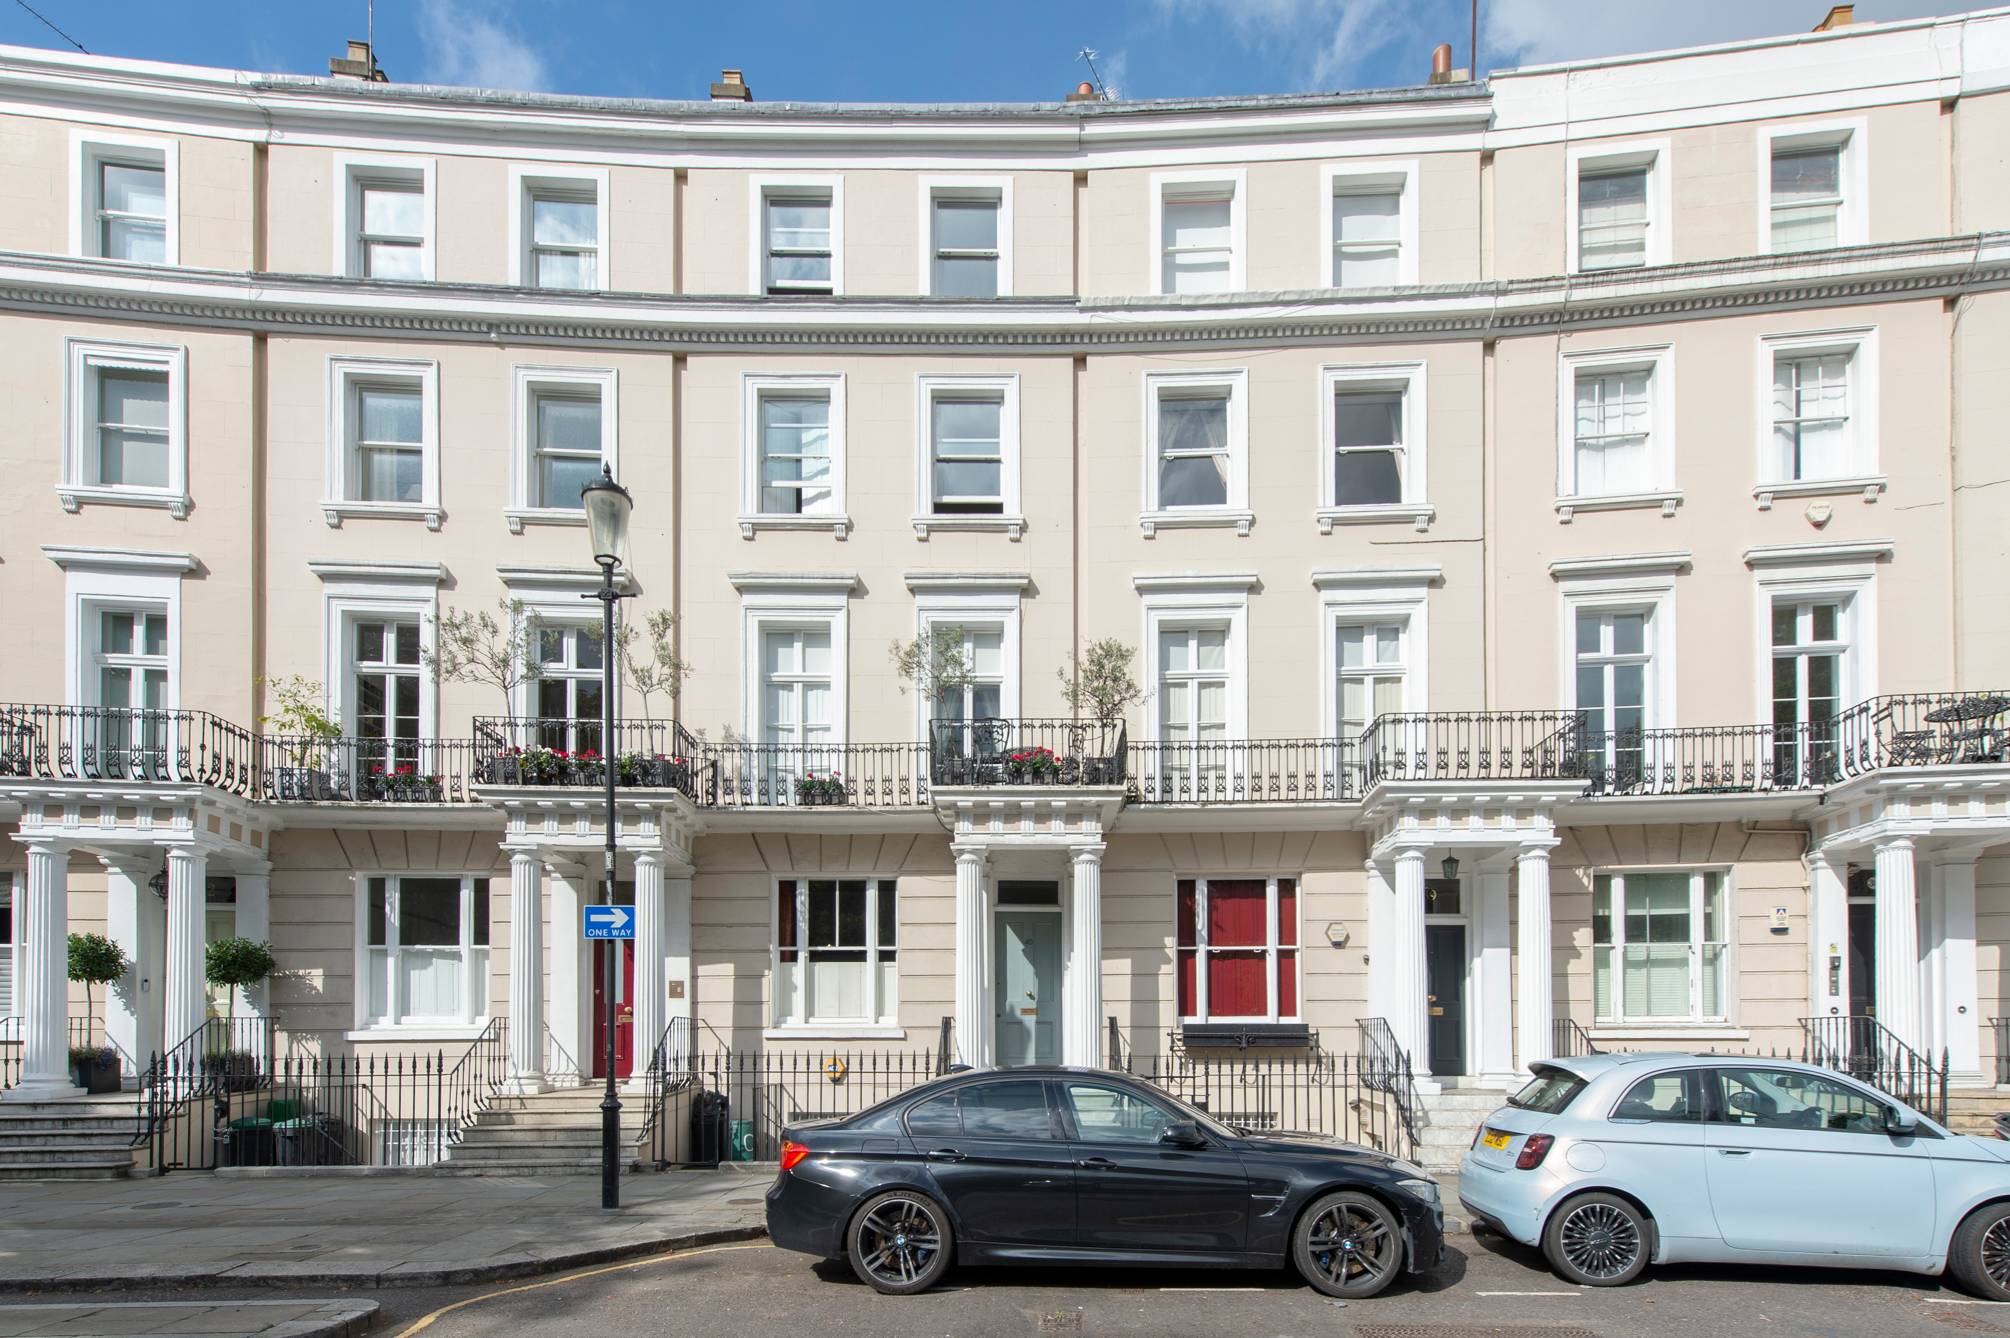 Traditional Stucco Fronted 3 Bed Duplex Apartment in Prestigious Holland Park